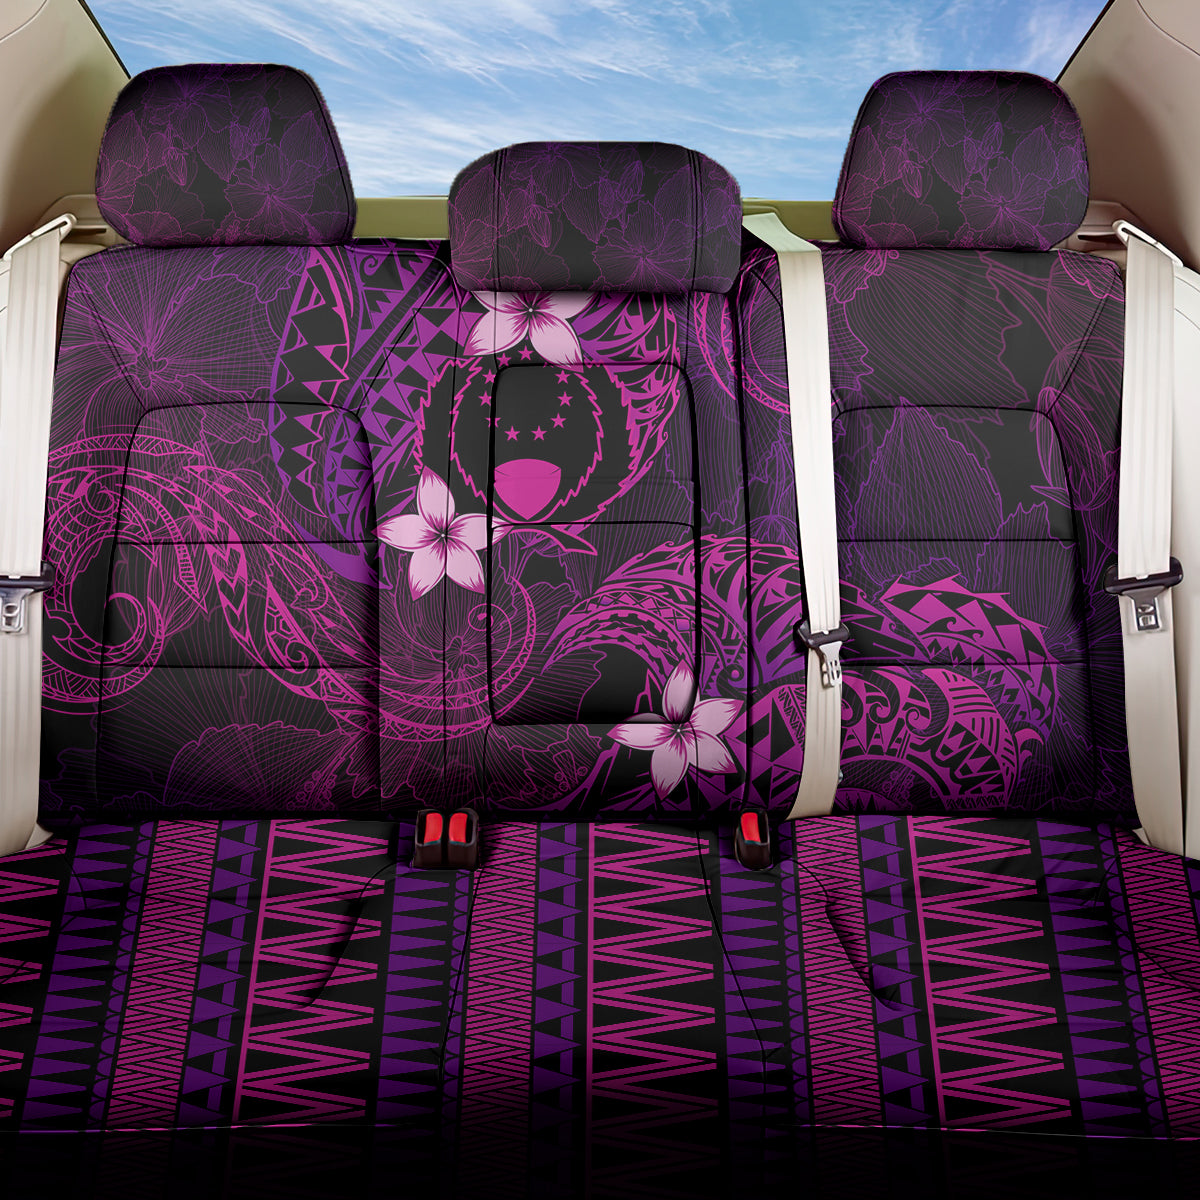 FSM Pohnpei State Back Car Seat Cover Tribal Pattern Pink Version LT01 One Size Pink - Polynesian Pride